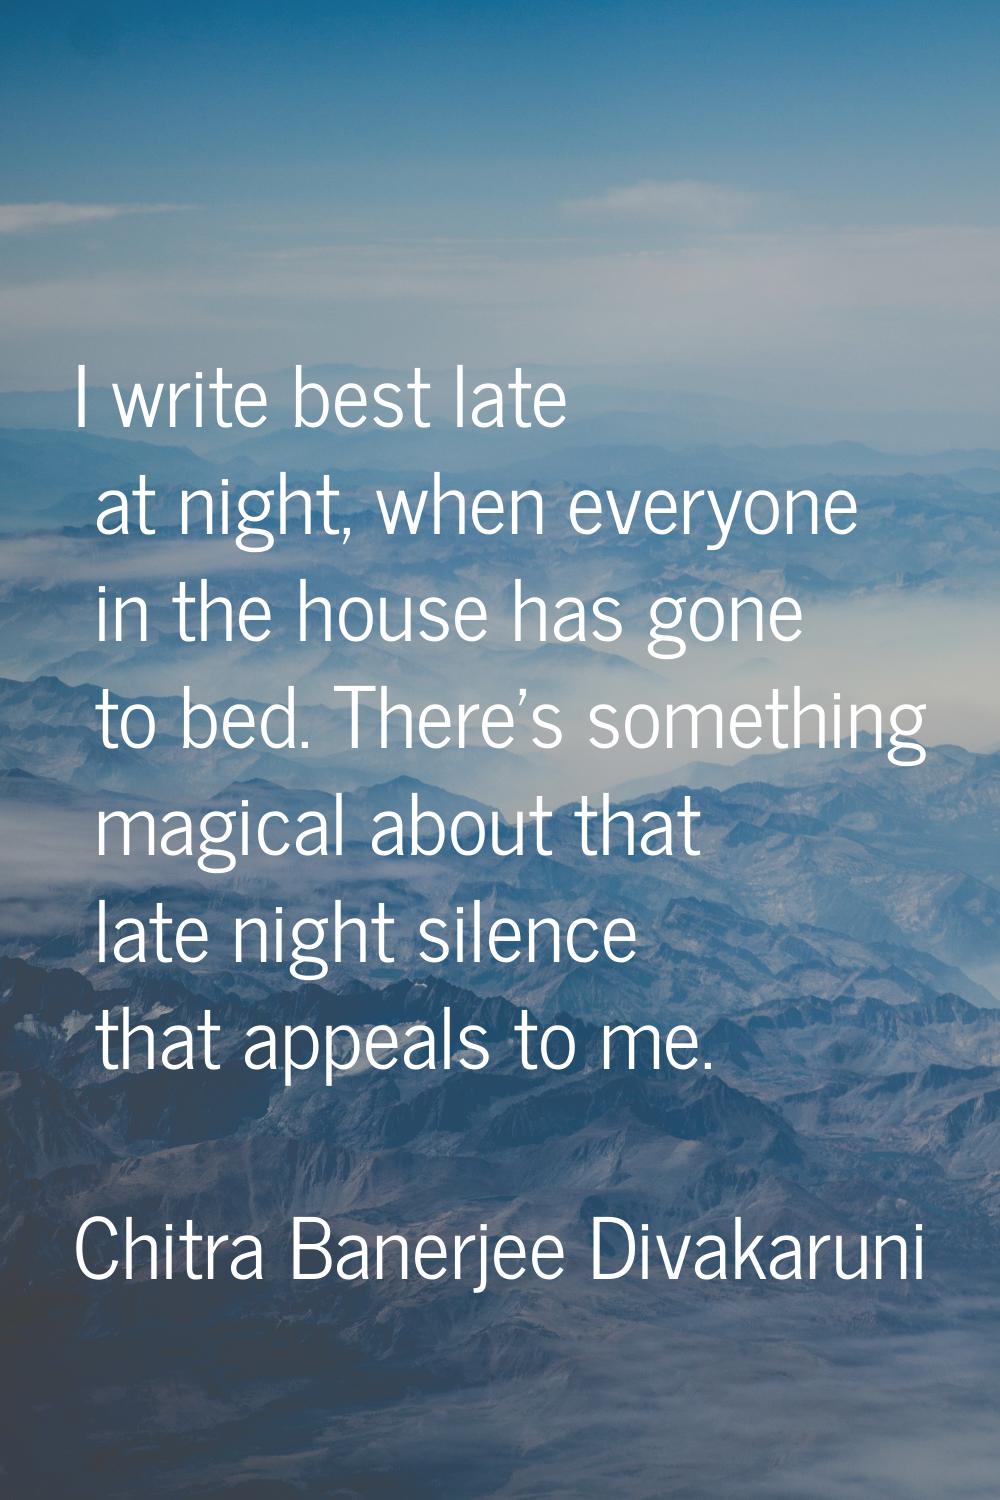 I write best late at night, when everyone in the house has gone to bed. There's something magical a